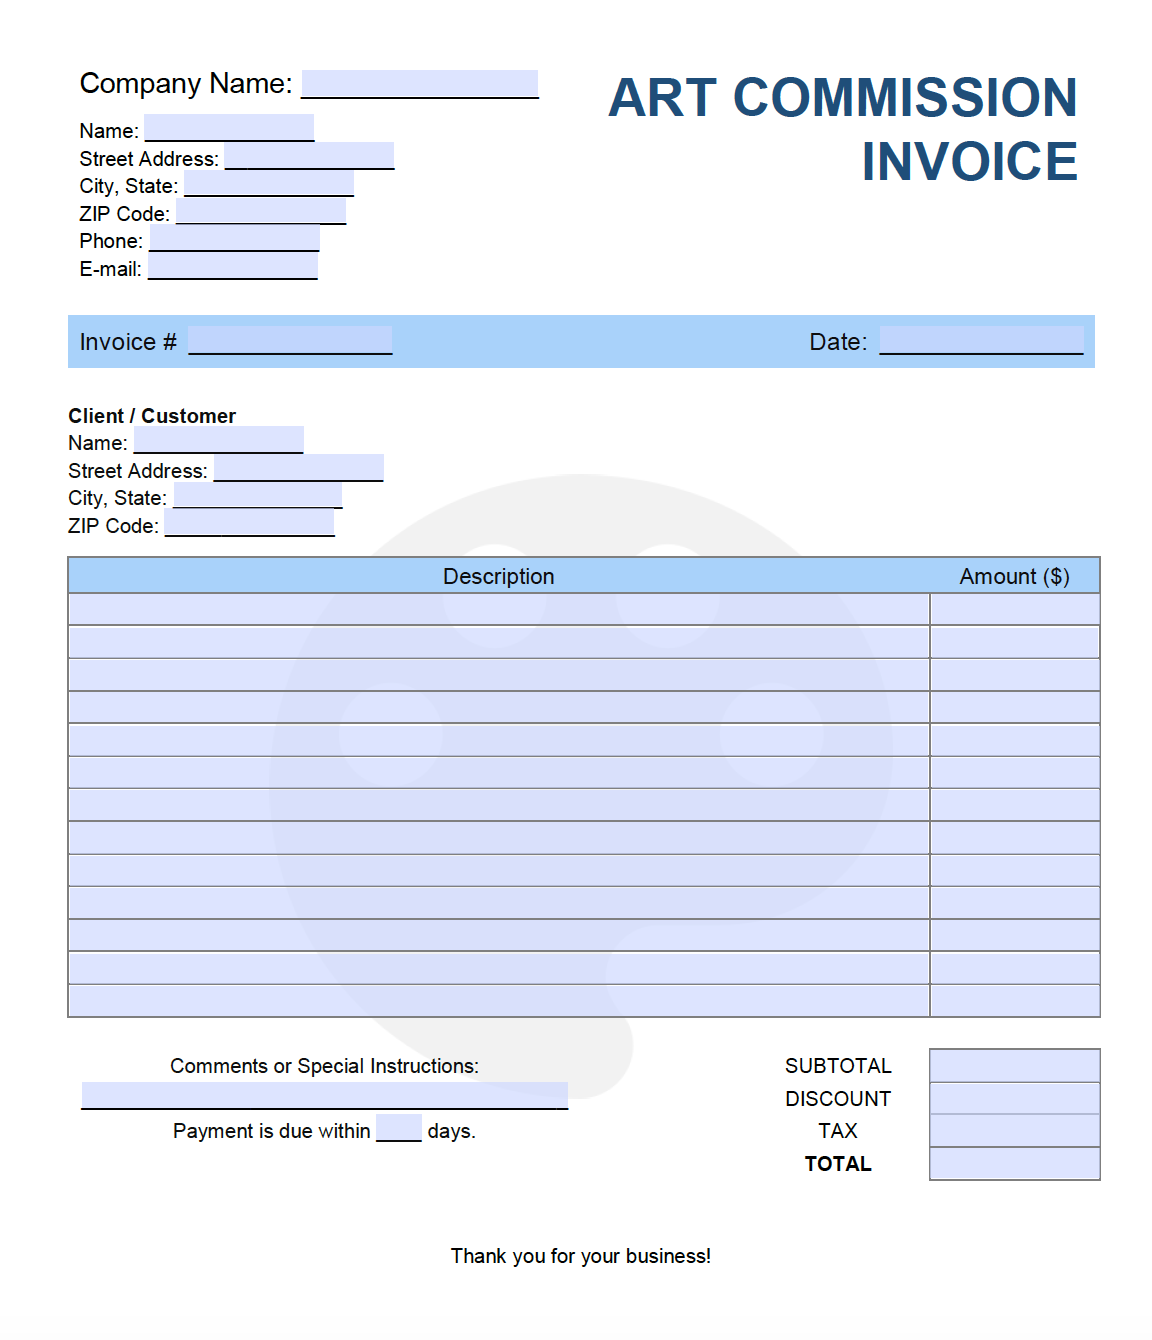 Free Art Commission Invoice Template PDF WORD EXCEL